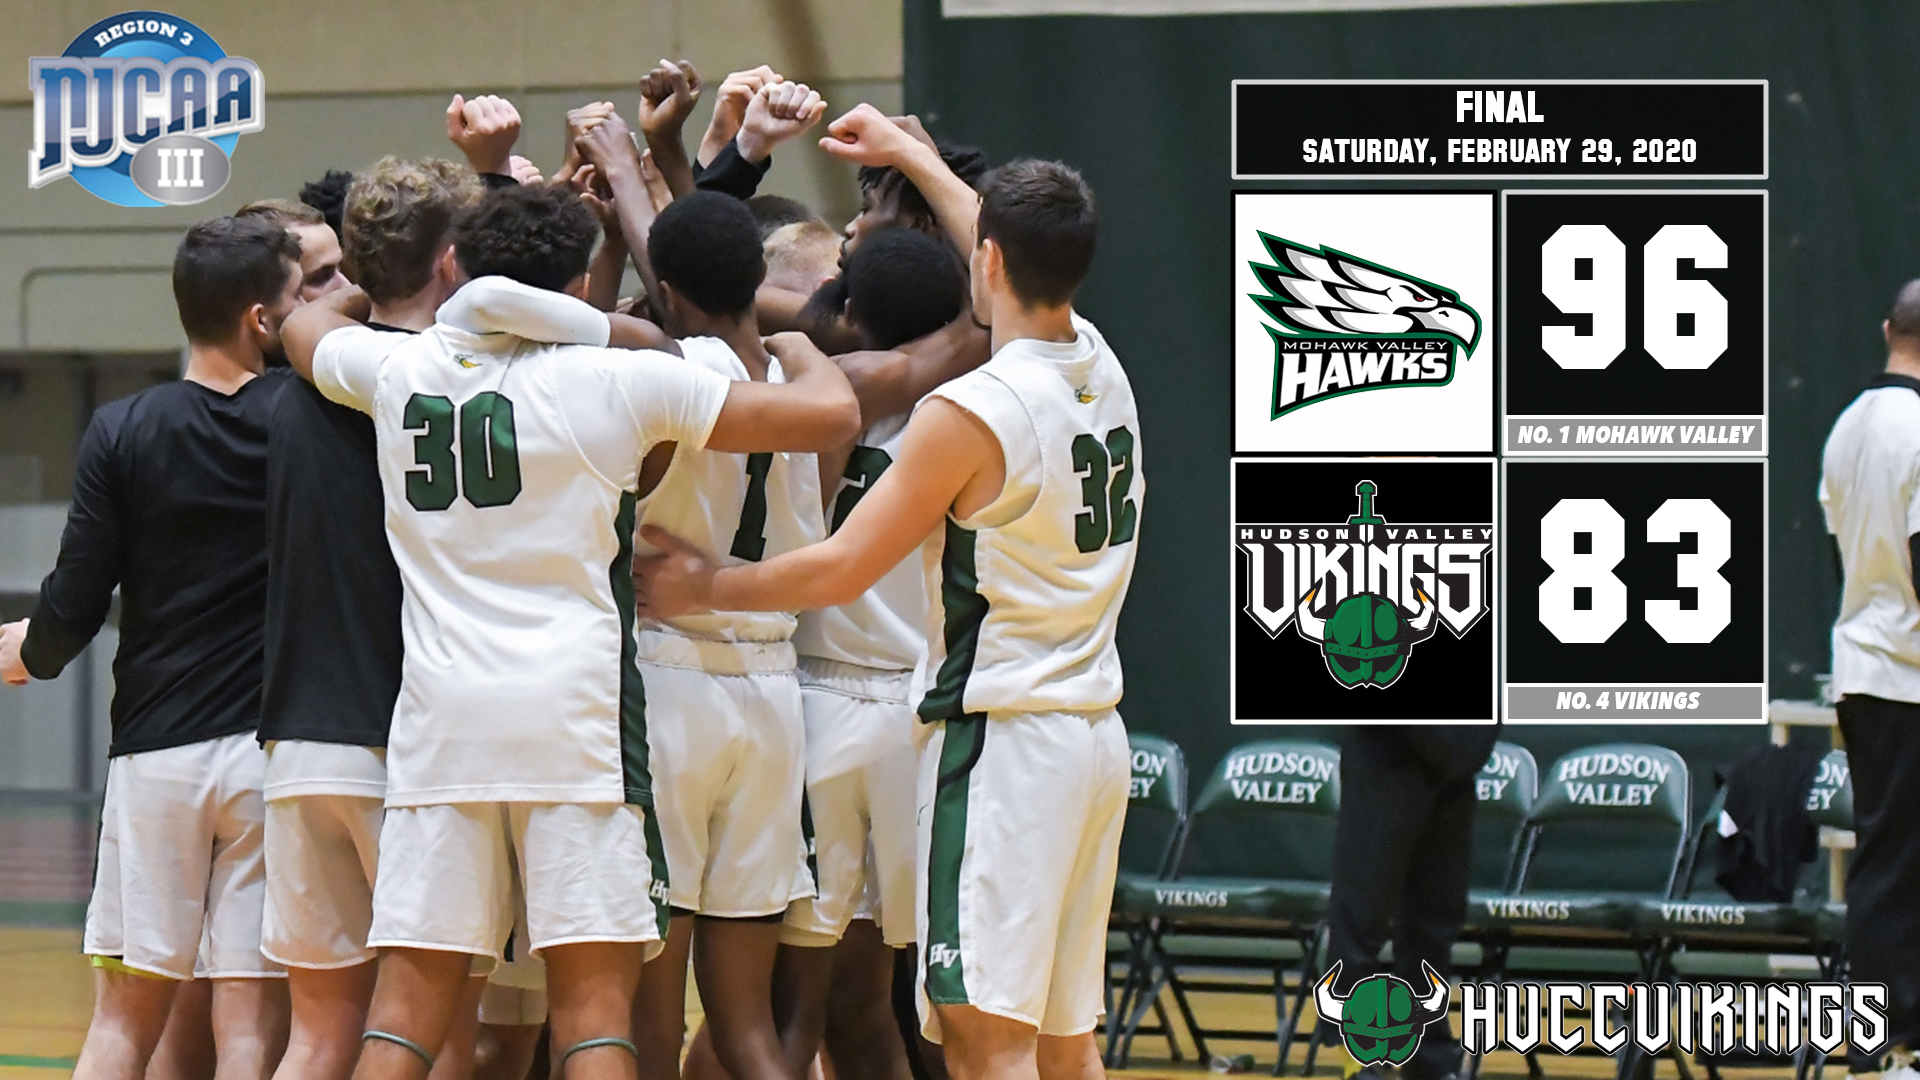 Men's basketball defeated by Mohawk Valley 96-83 on Feb. 29, 2020. 